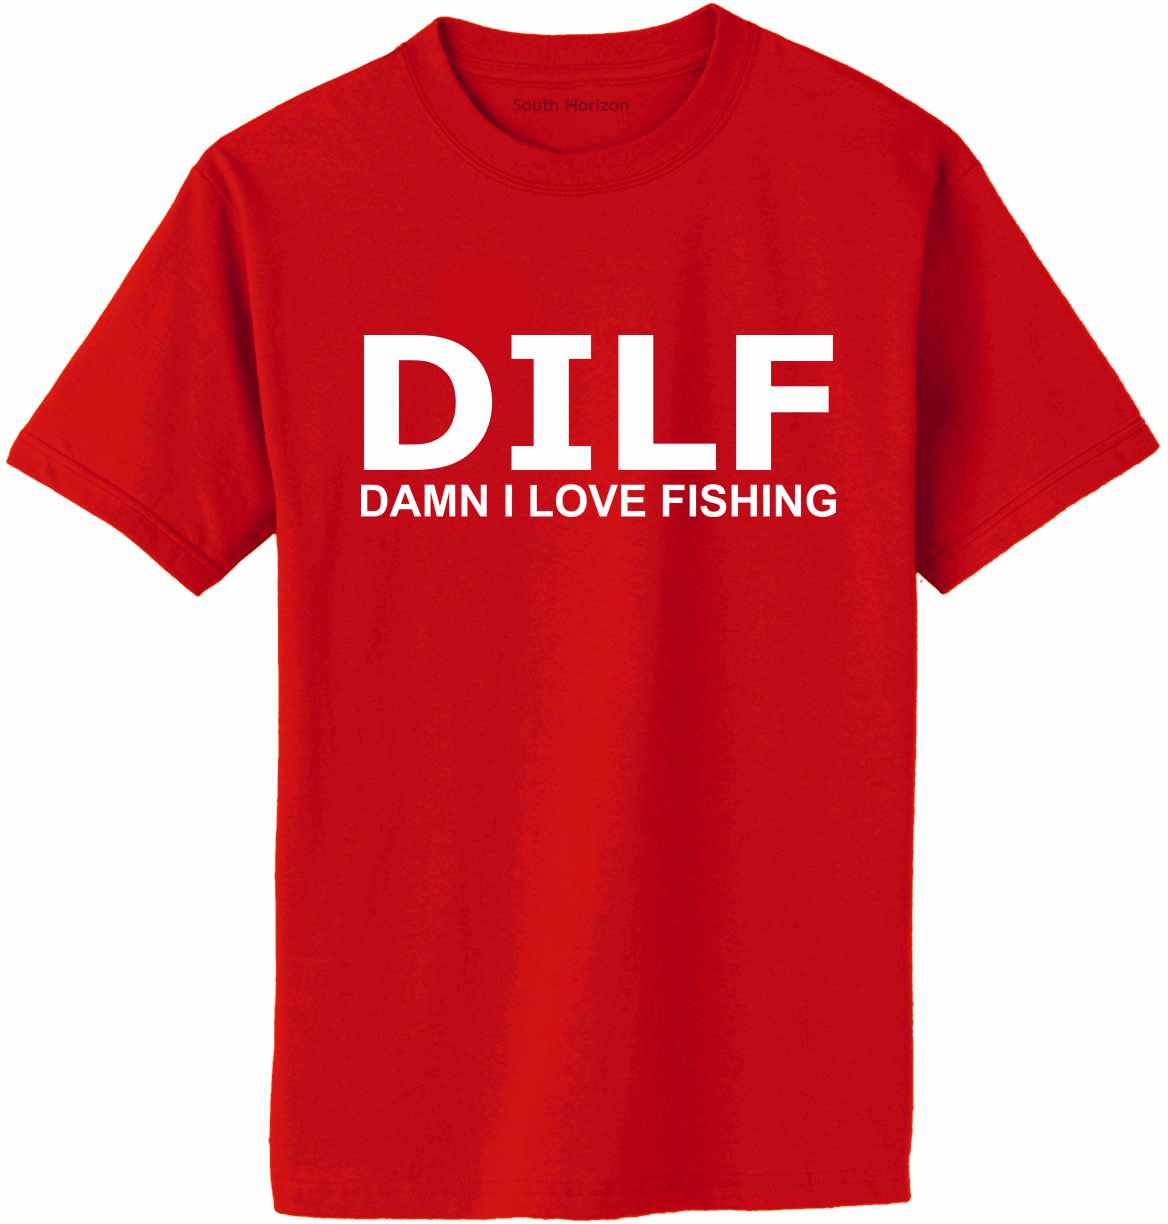 Dilf Damn I Love Fishing On adult T-Shirt in 15 Colors Red / XLarge